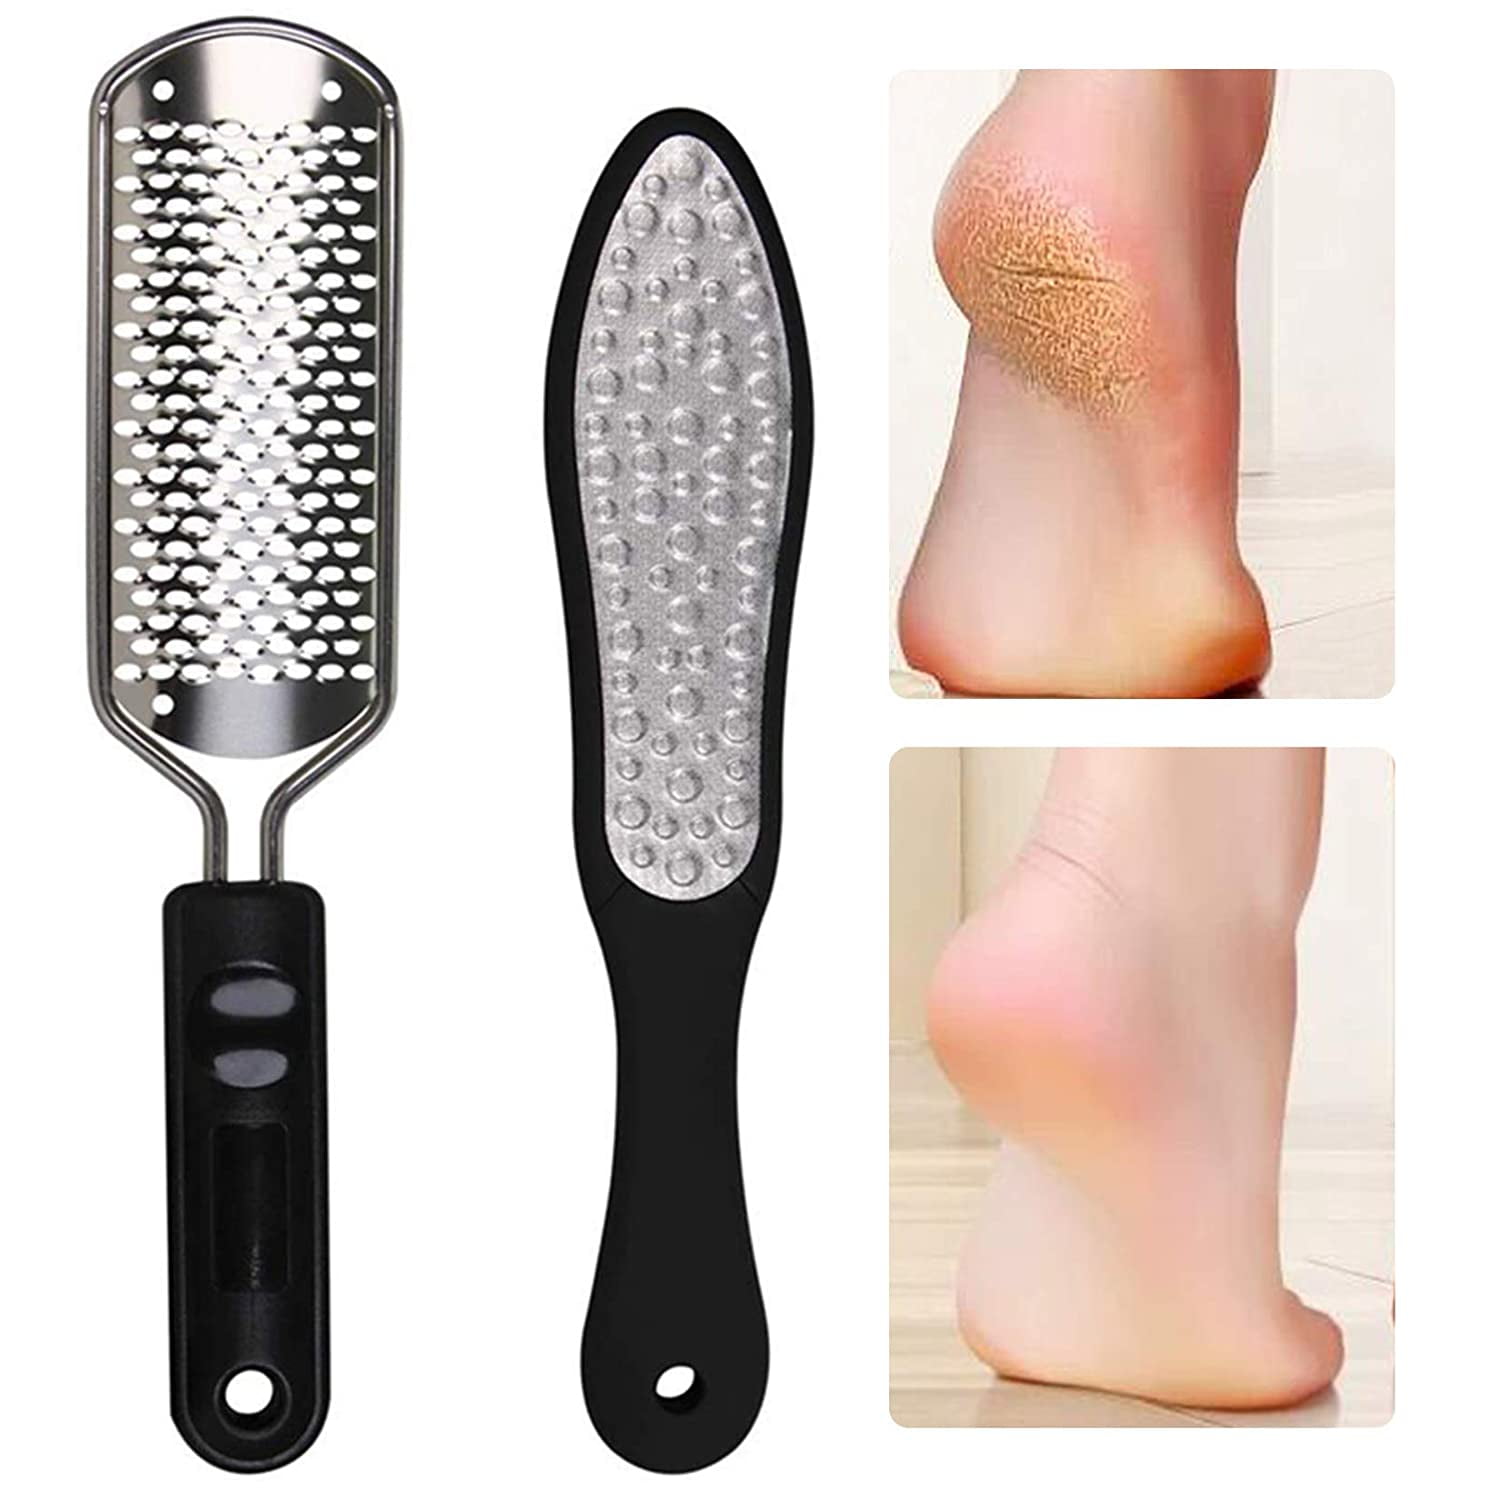 Riorre Professional Foot Scrubber for Hard Skin - Pack 3 Pedicure Foot  File, Foot Scraper & Callus Remover for Feet Leaving Soft & Smooth Heels